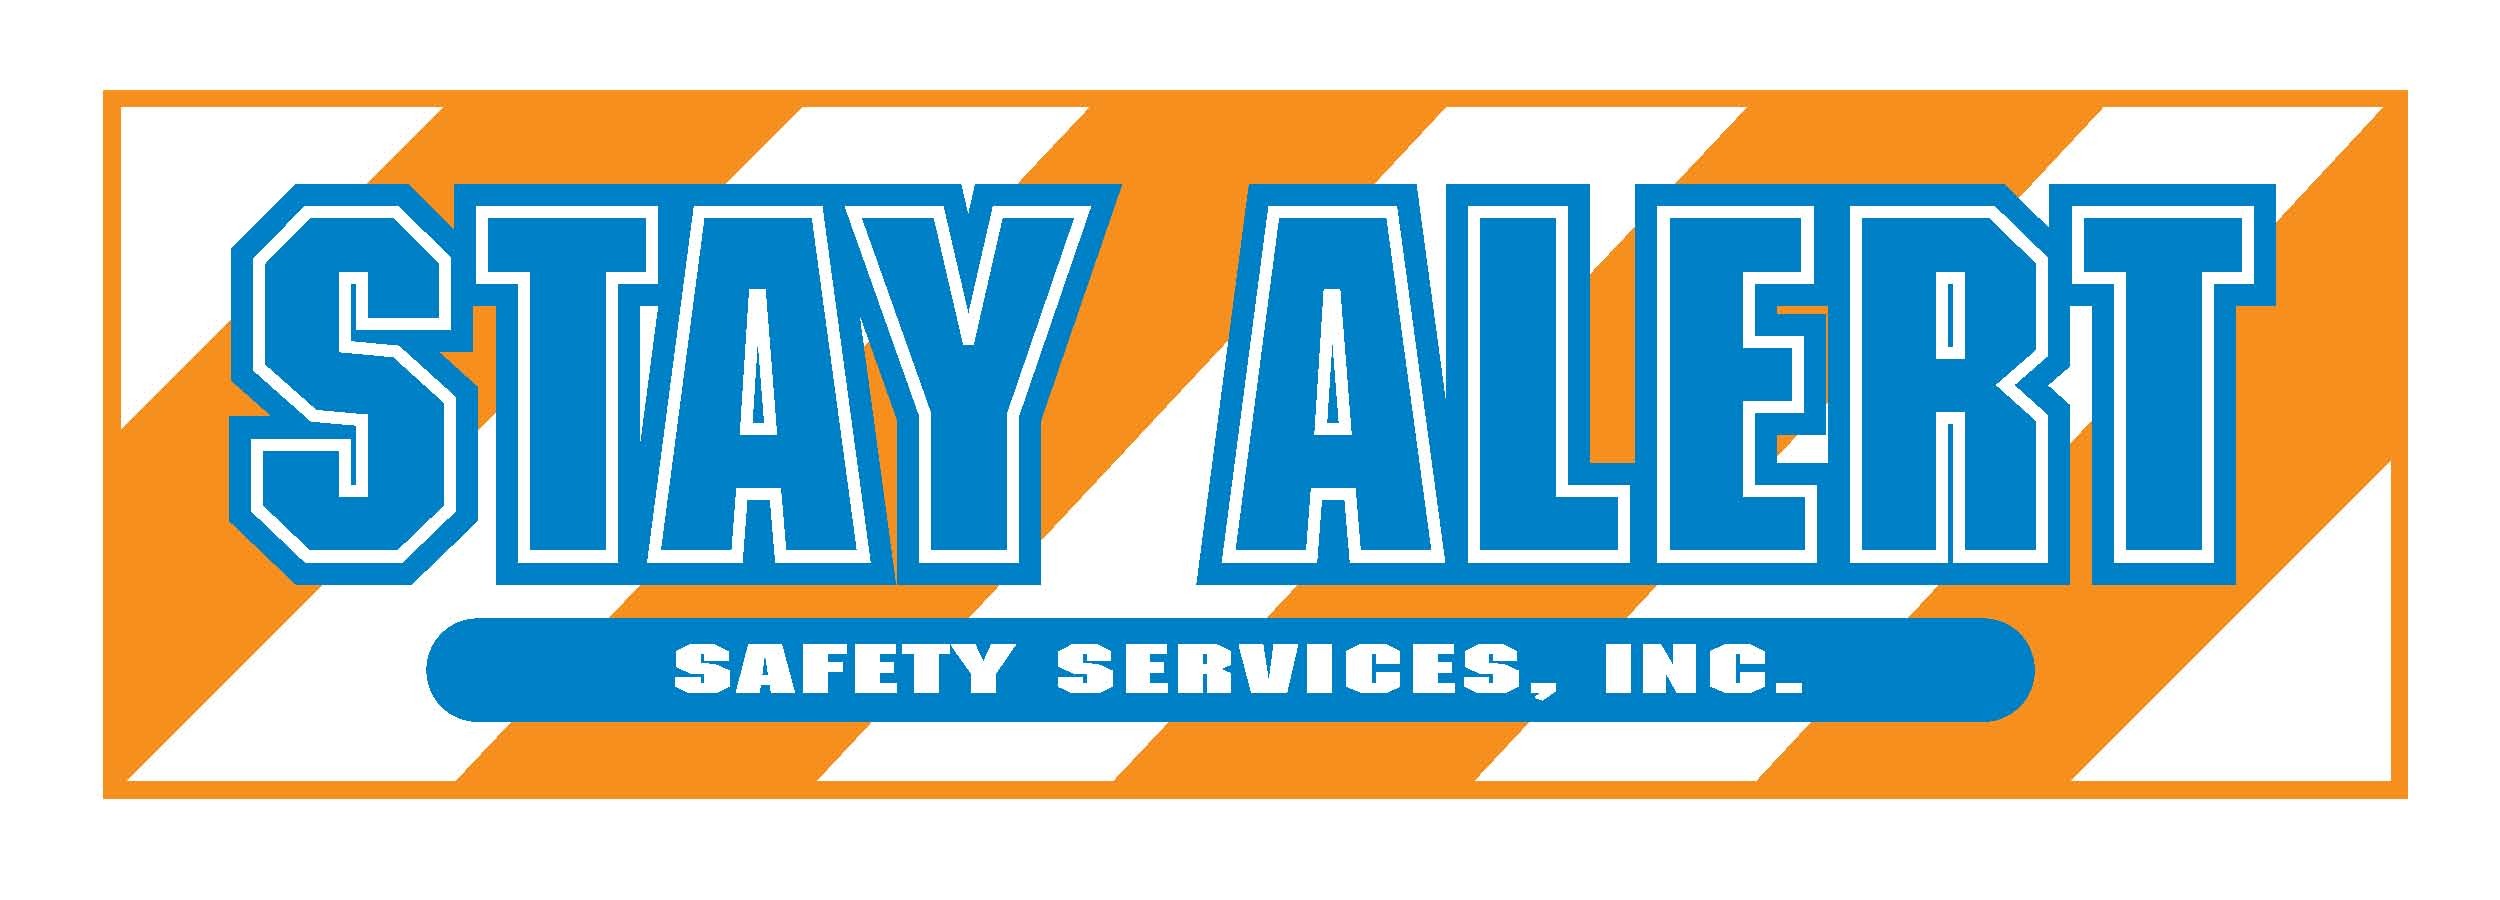 Stay Alert Safety Services Inc.